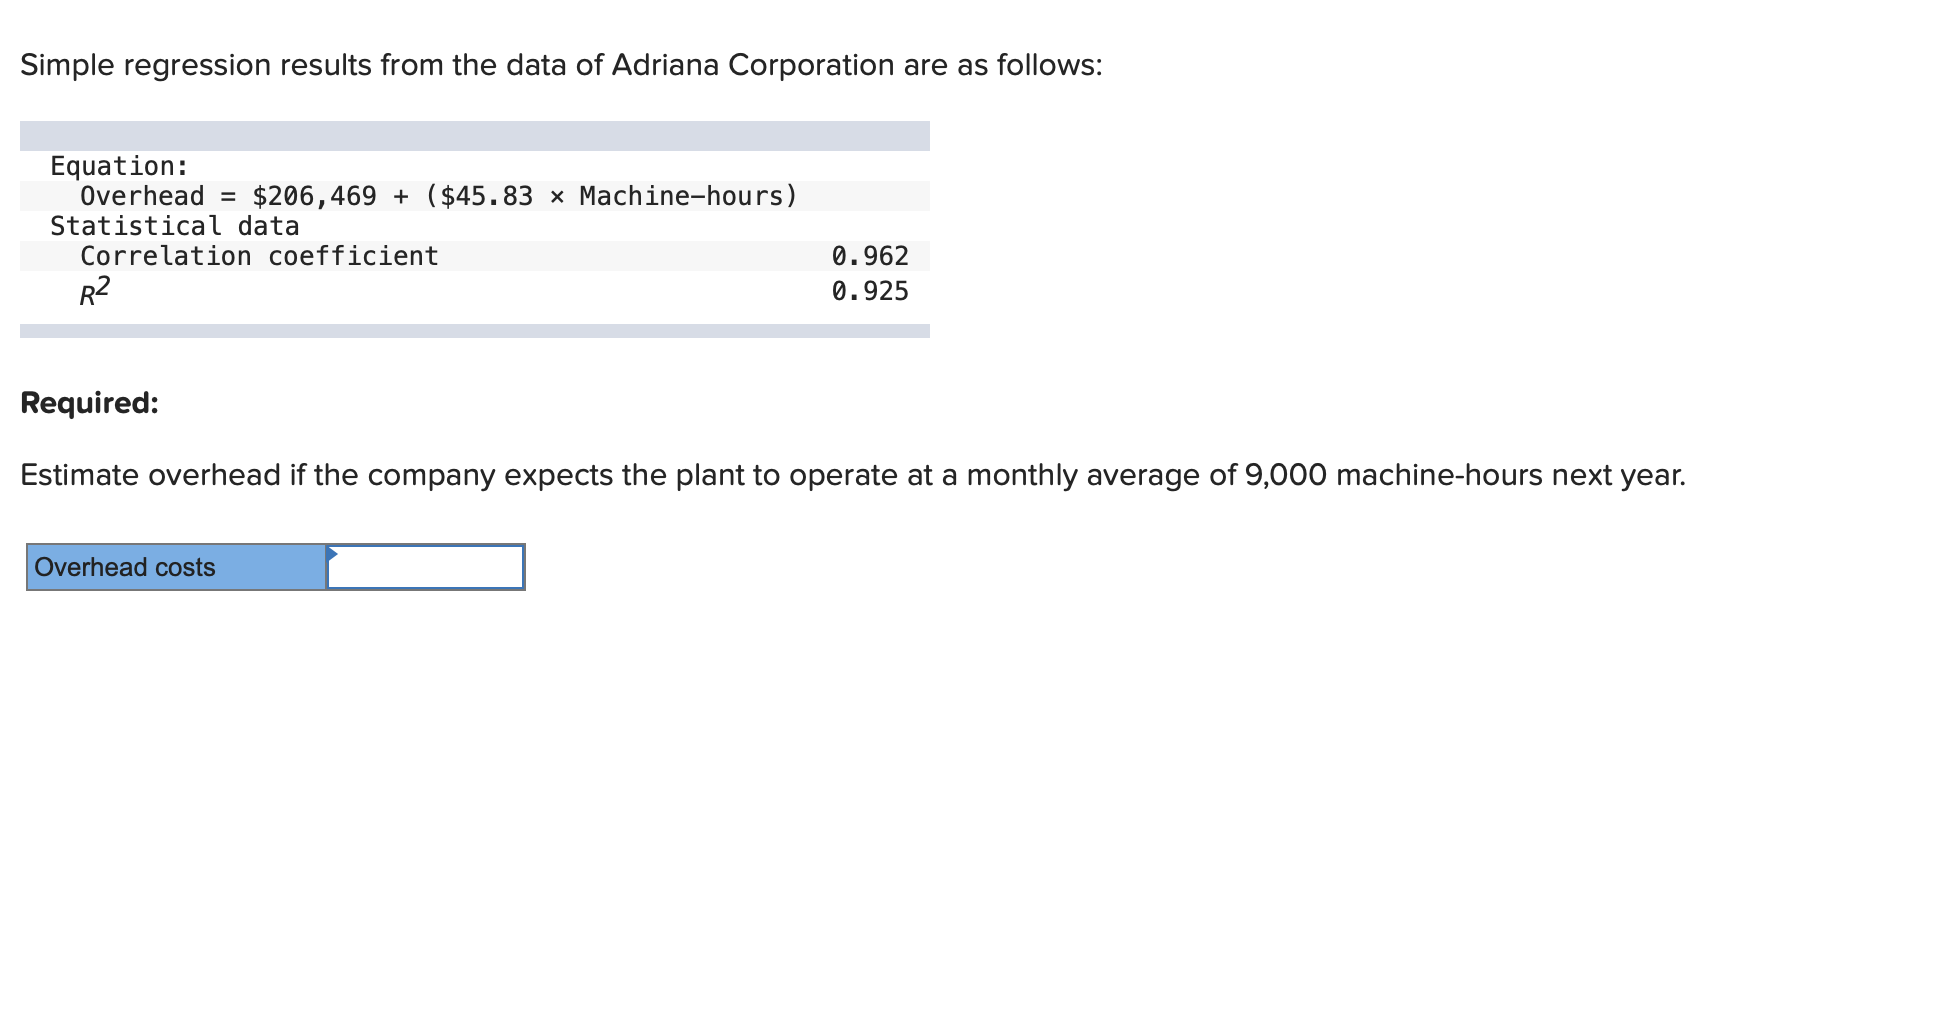 Simple regression results from the data of Adriana Corporation are as follows:
Equation:
Overhead = $206,469 + ($45.83 × Machine-hours)
Statistical data
Correlation coefficient
0.962
R2
0.925
Required:
Estimate overhead if the company expects the plant to operate at a monthly average of 9,000 machine-hours next year.
Overhead costs
